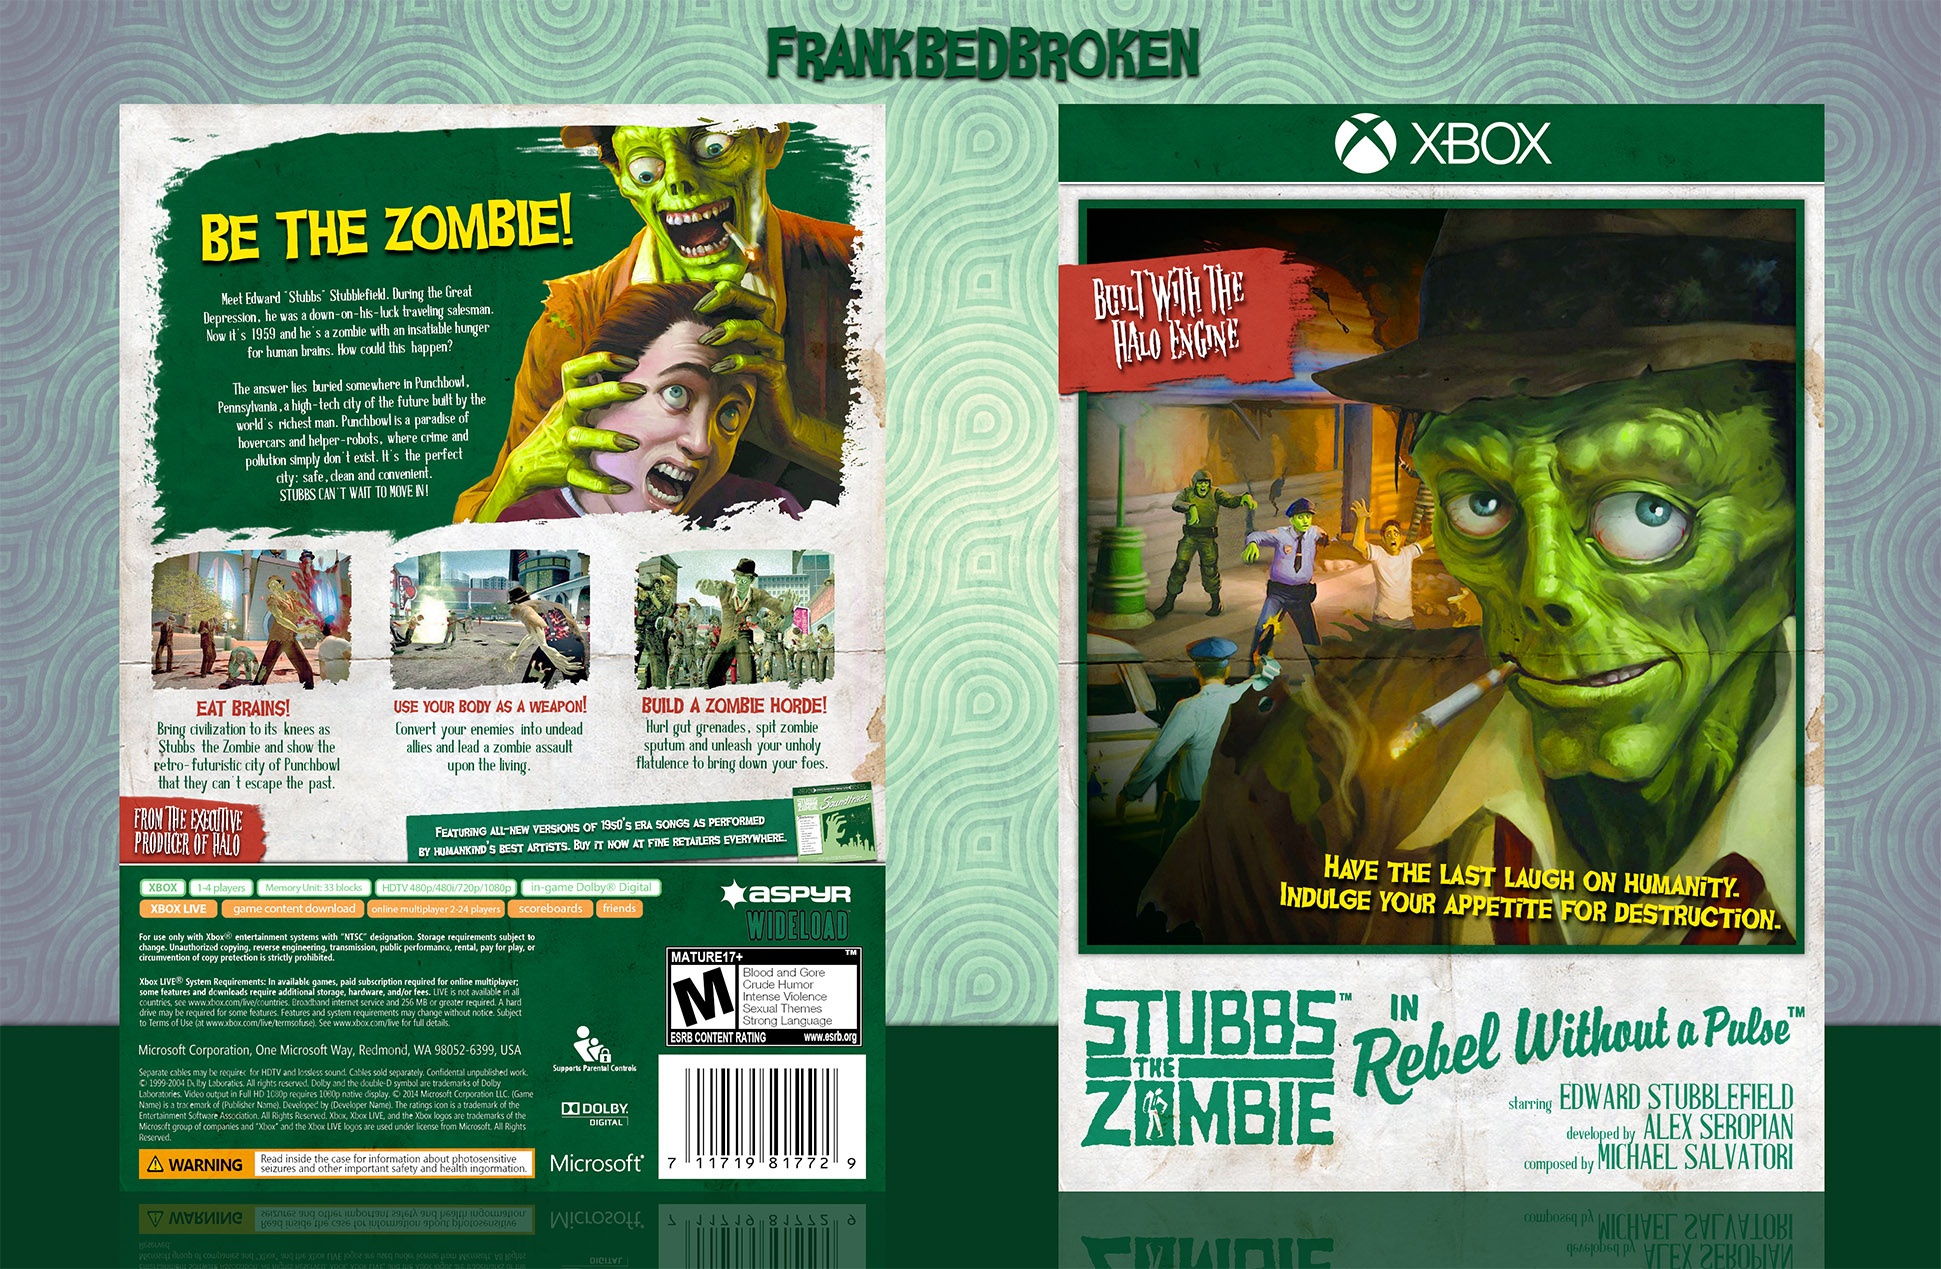 Stubbs The Zombie In Rebel Without A Pulse box cover